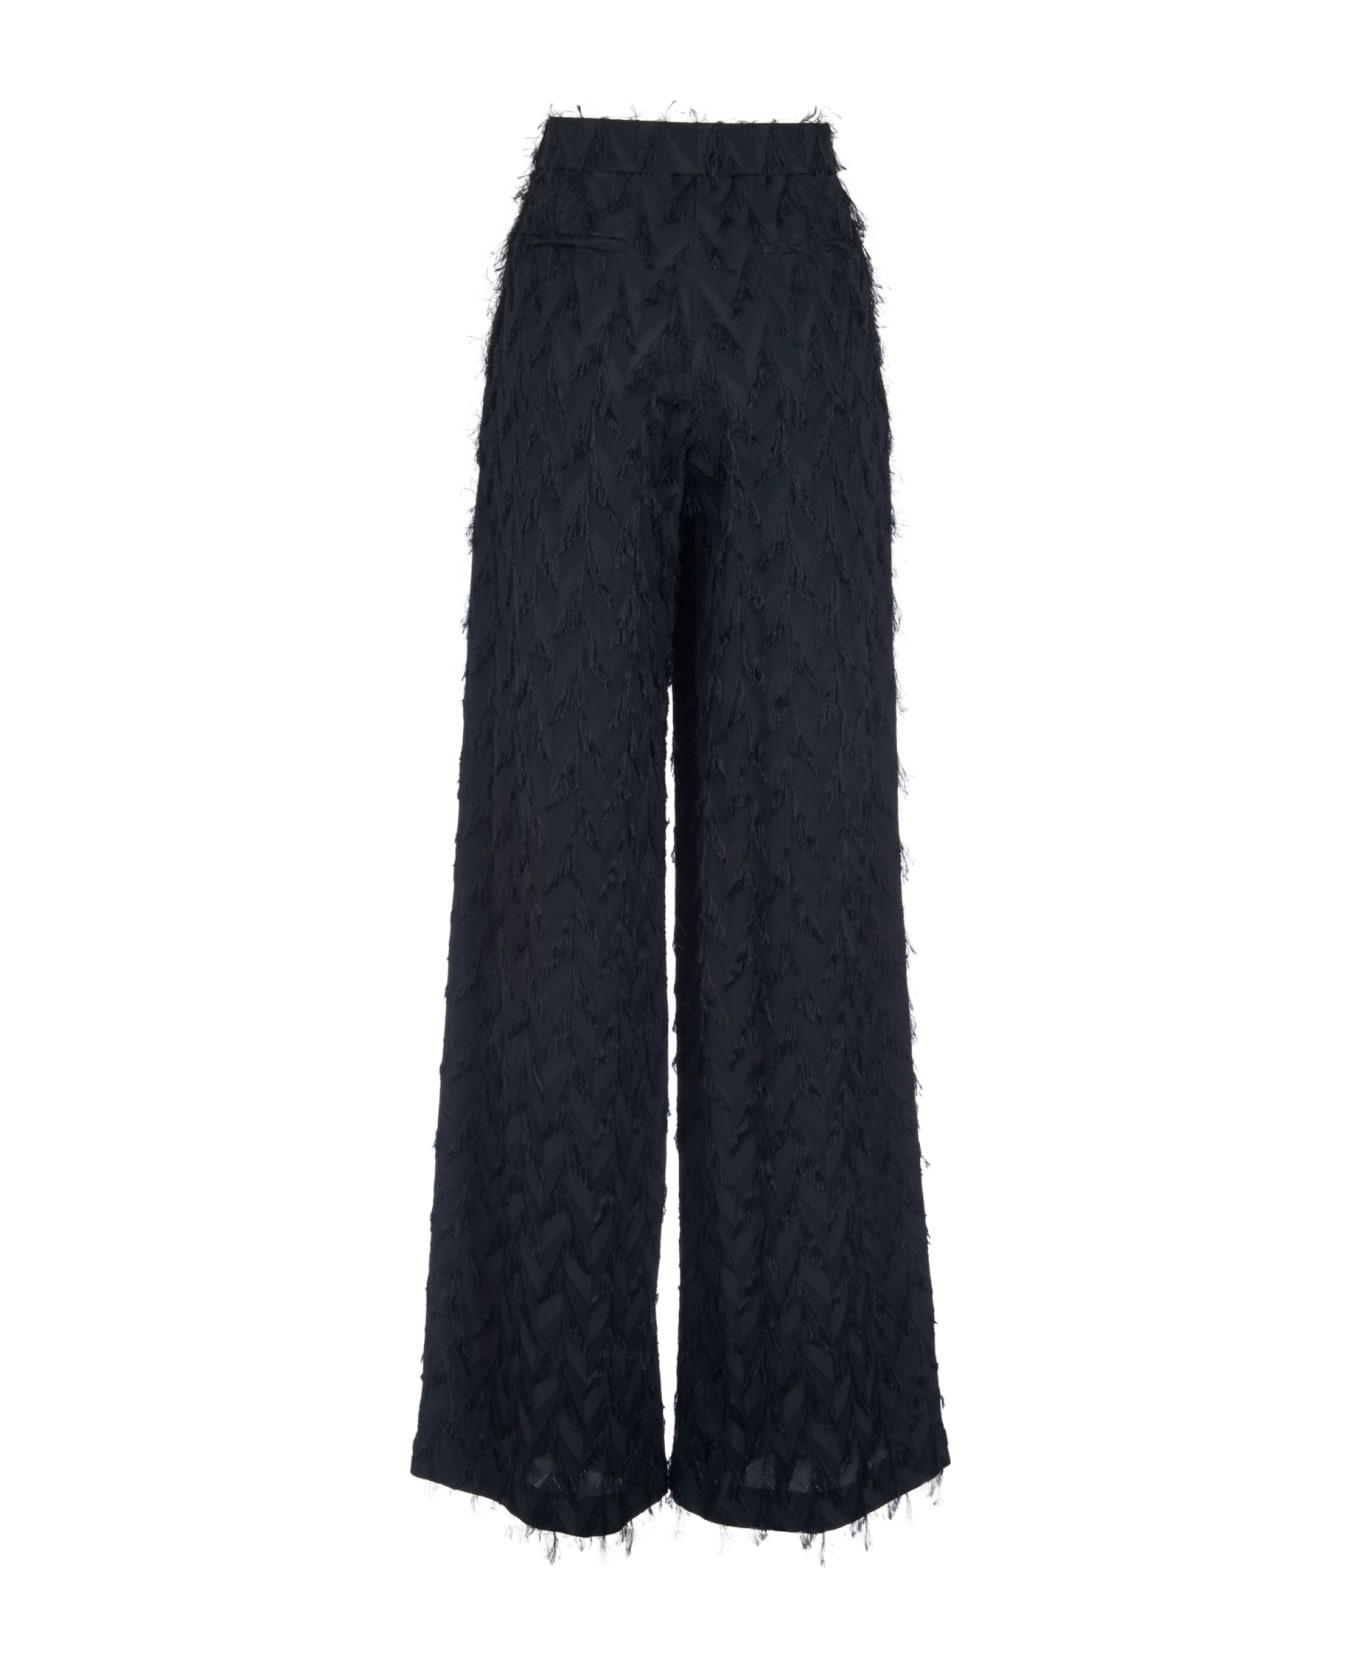 MSGM Concealed Fringed Trousers - Nero ボトムス